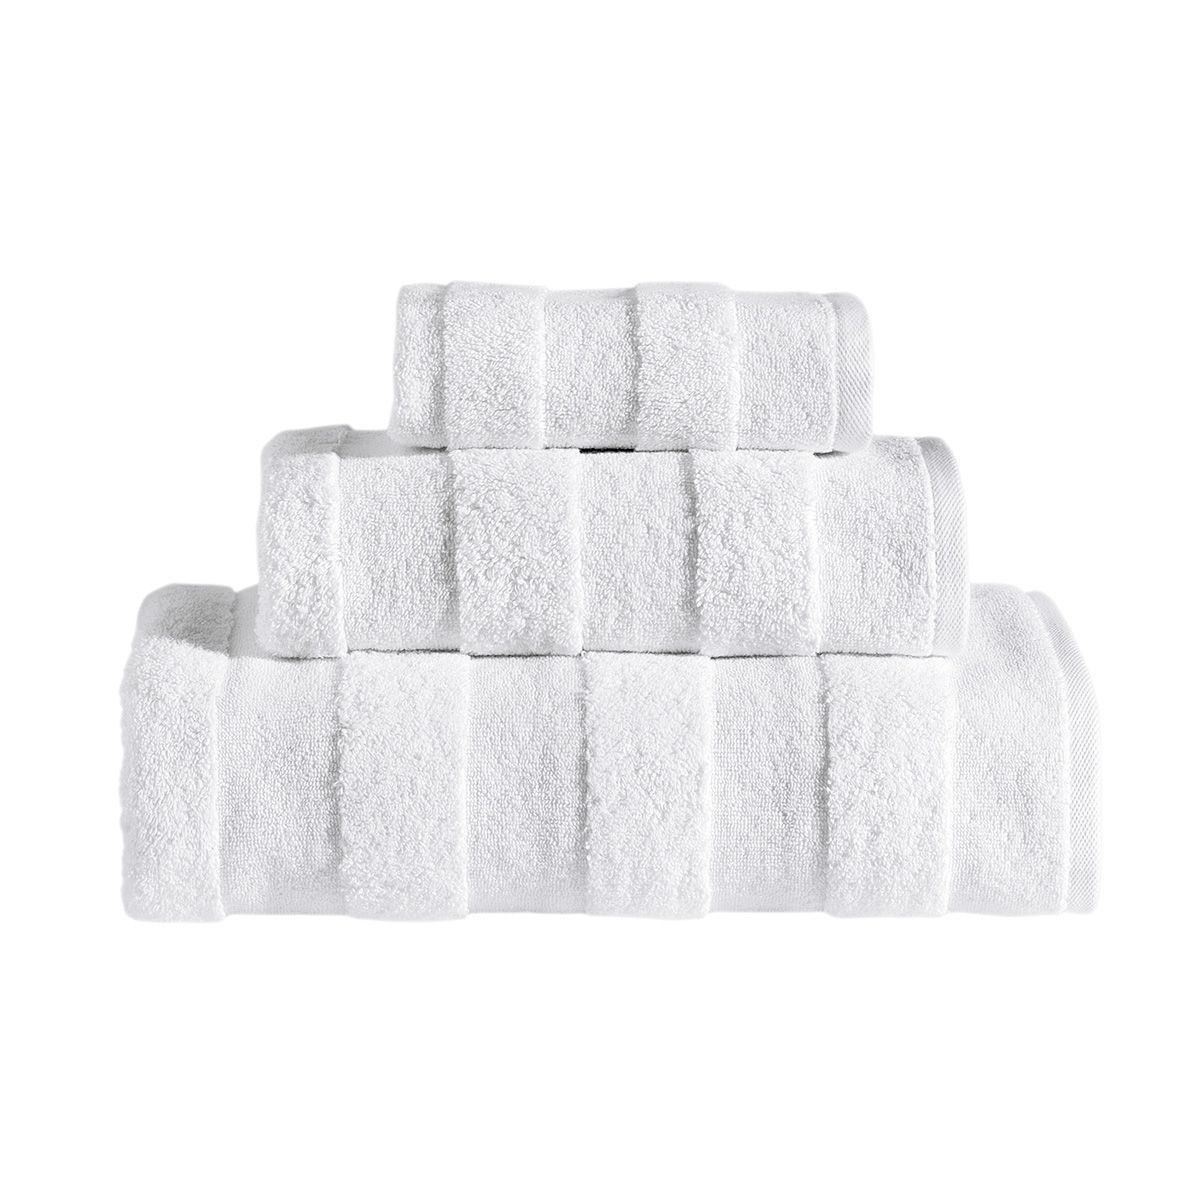 Apogee collection 3 PK Towels Set